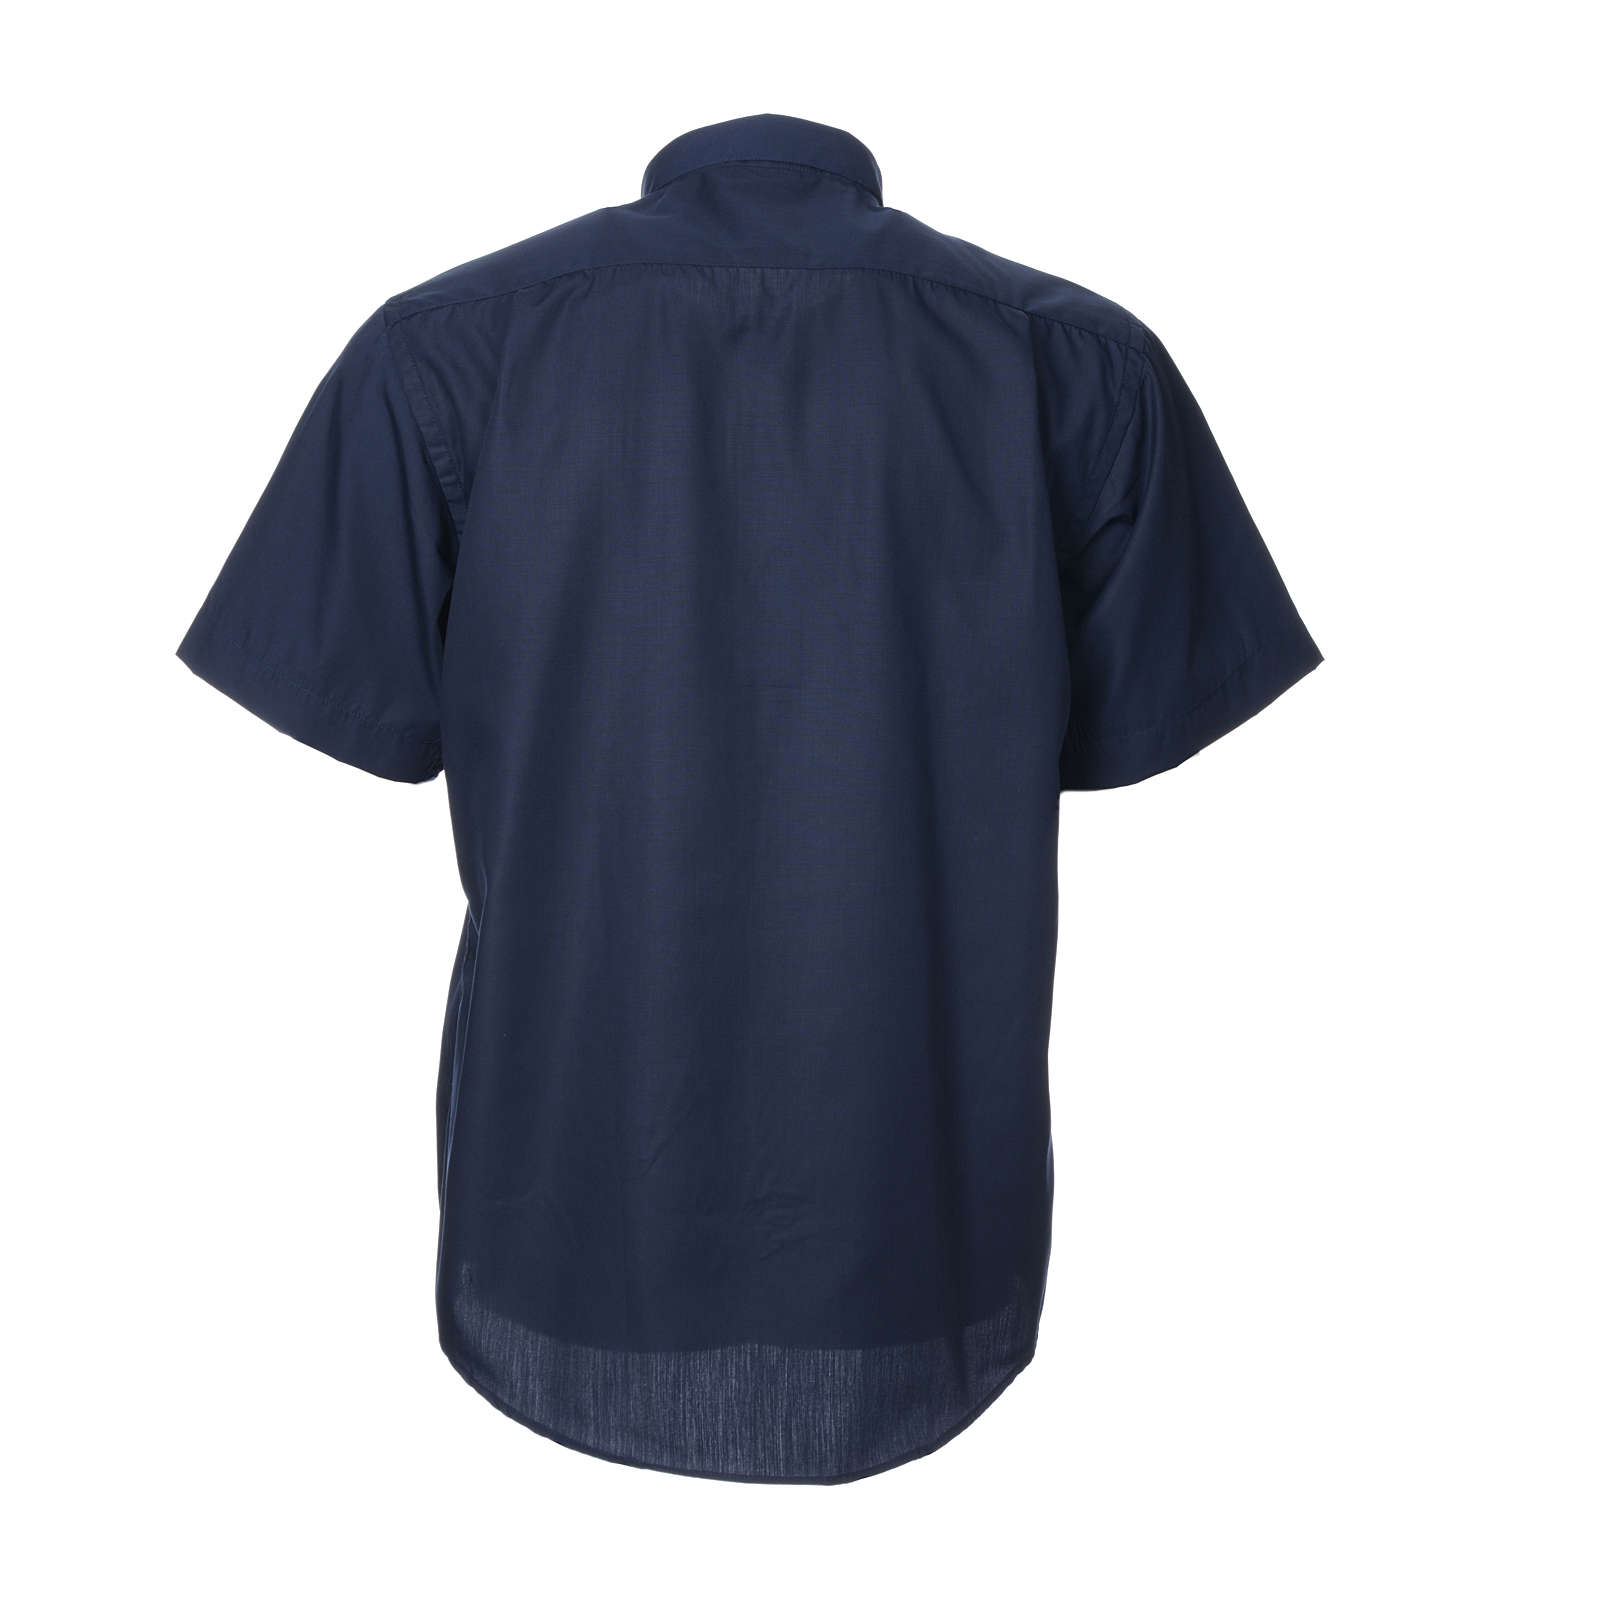 Clergyman shirt, short sleeves, blue mixed cotton | online sales on ...